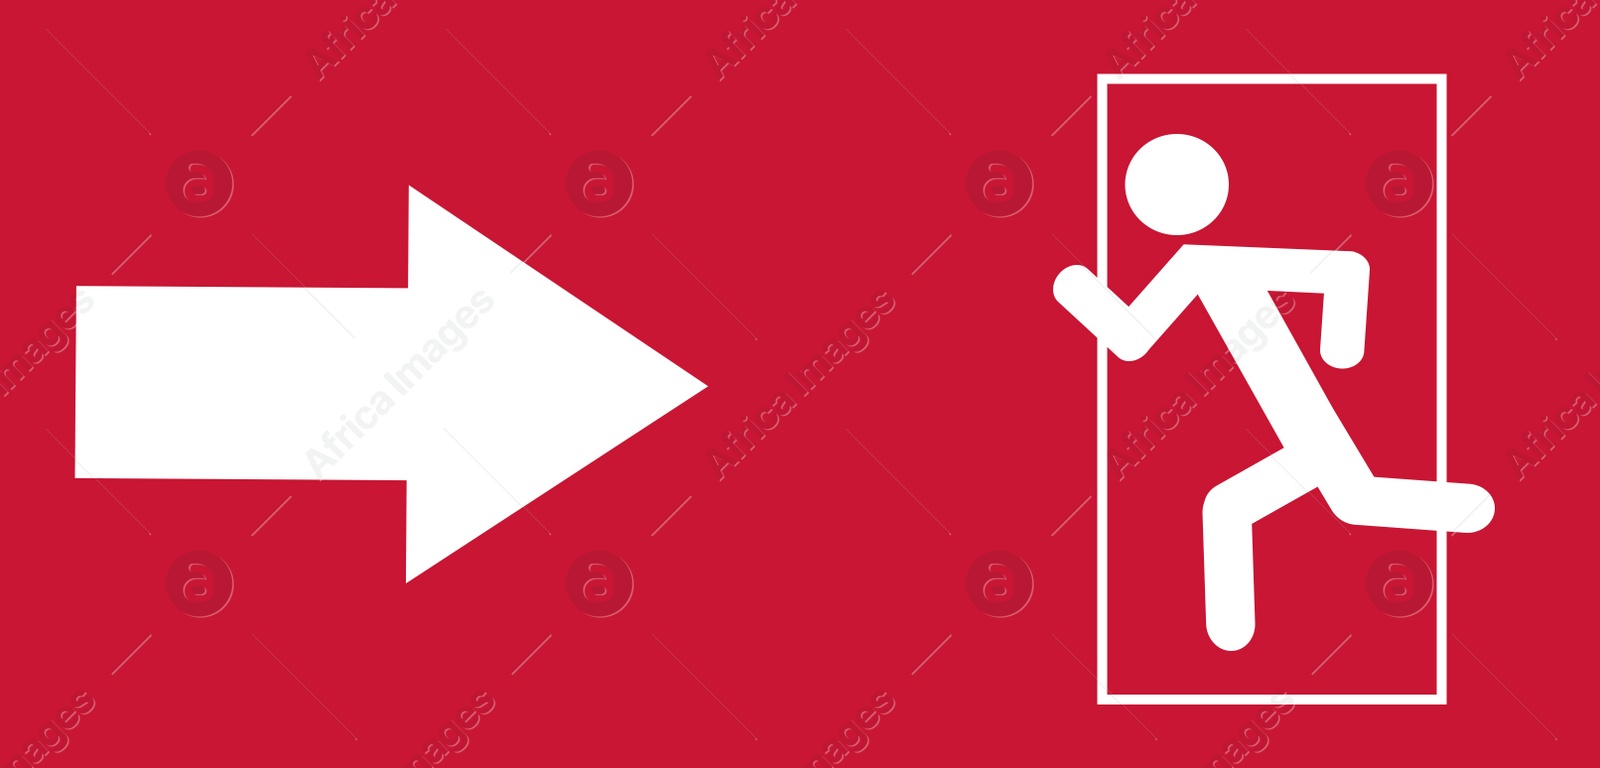 Image of Emergency exit sign in case of fire evacuation. Illustration 